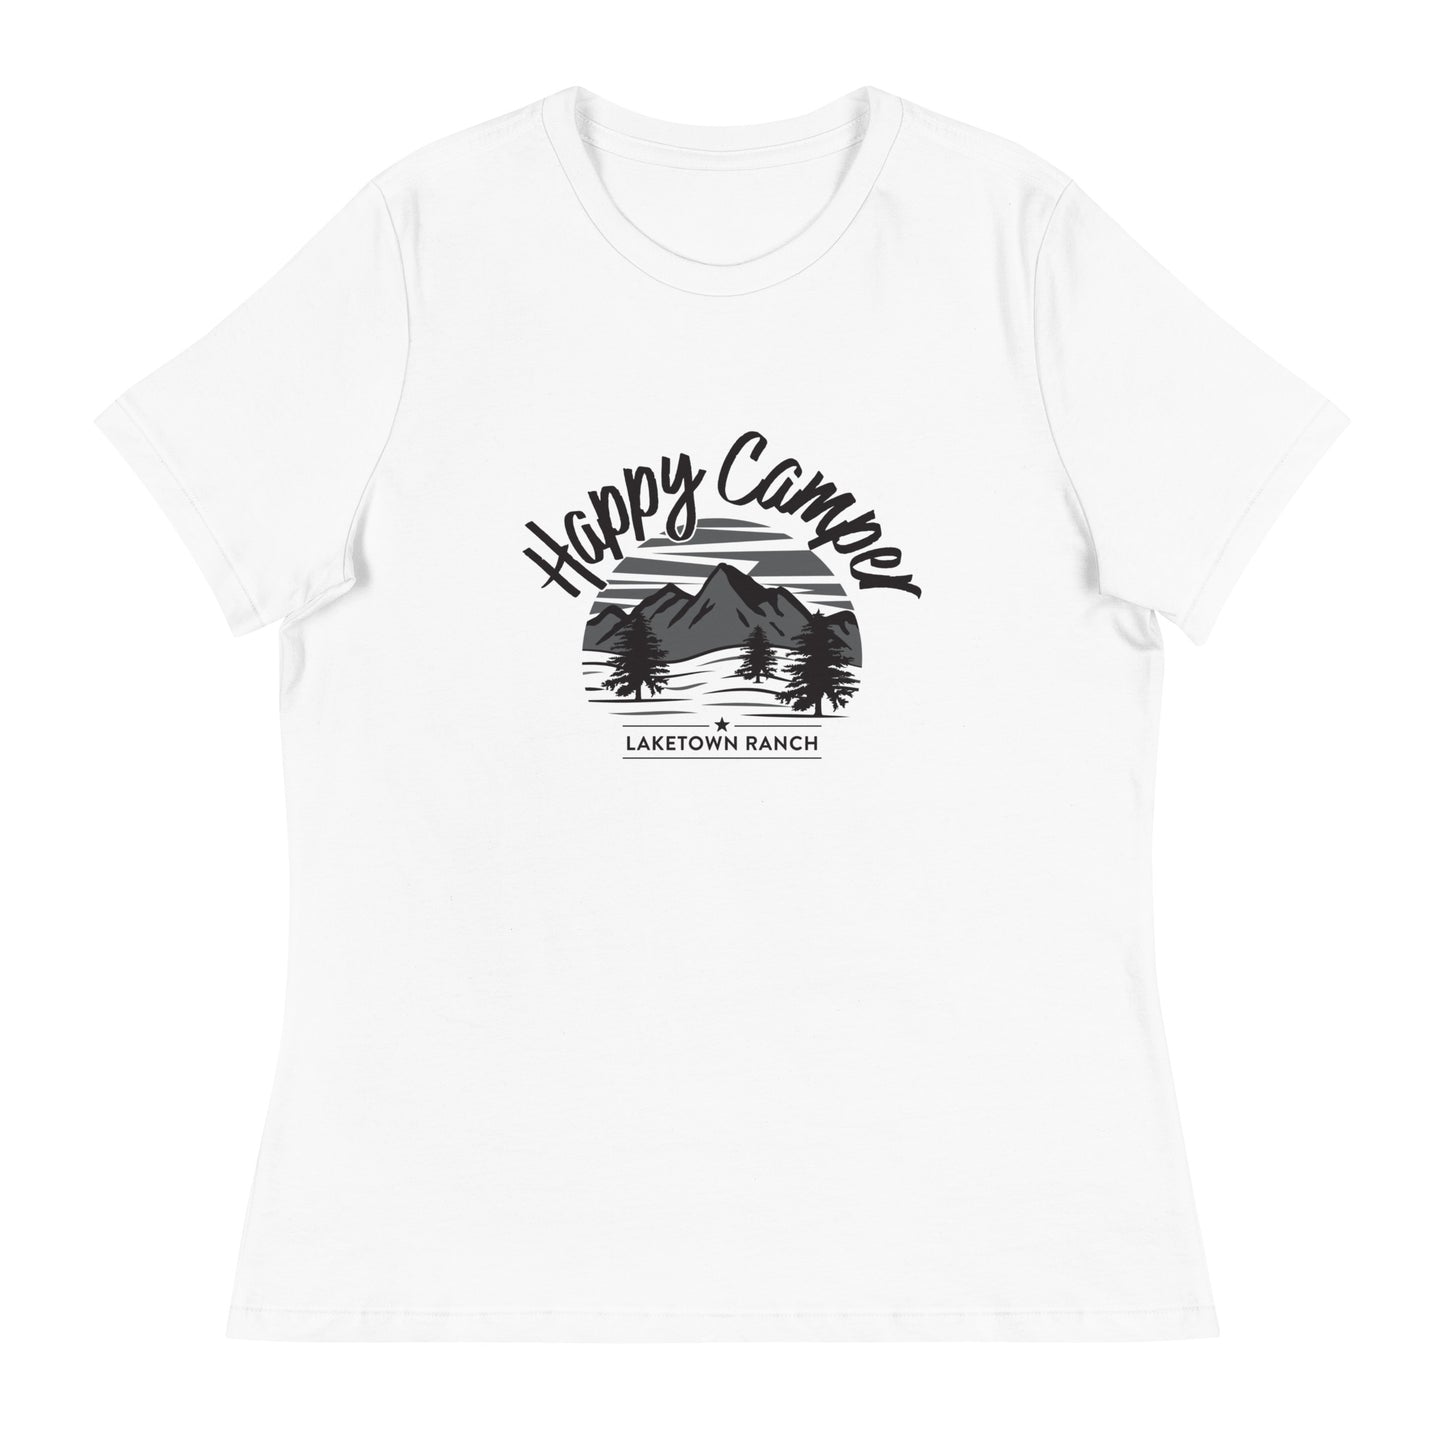 Laketown Ranch - Happy Camper - Women's Relaxed T-Shirt